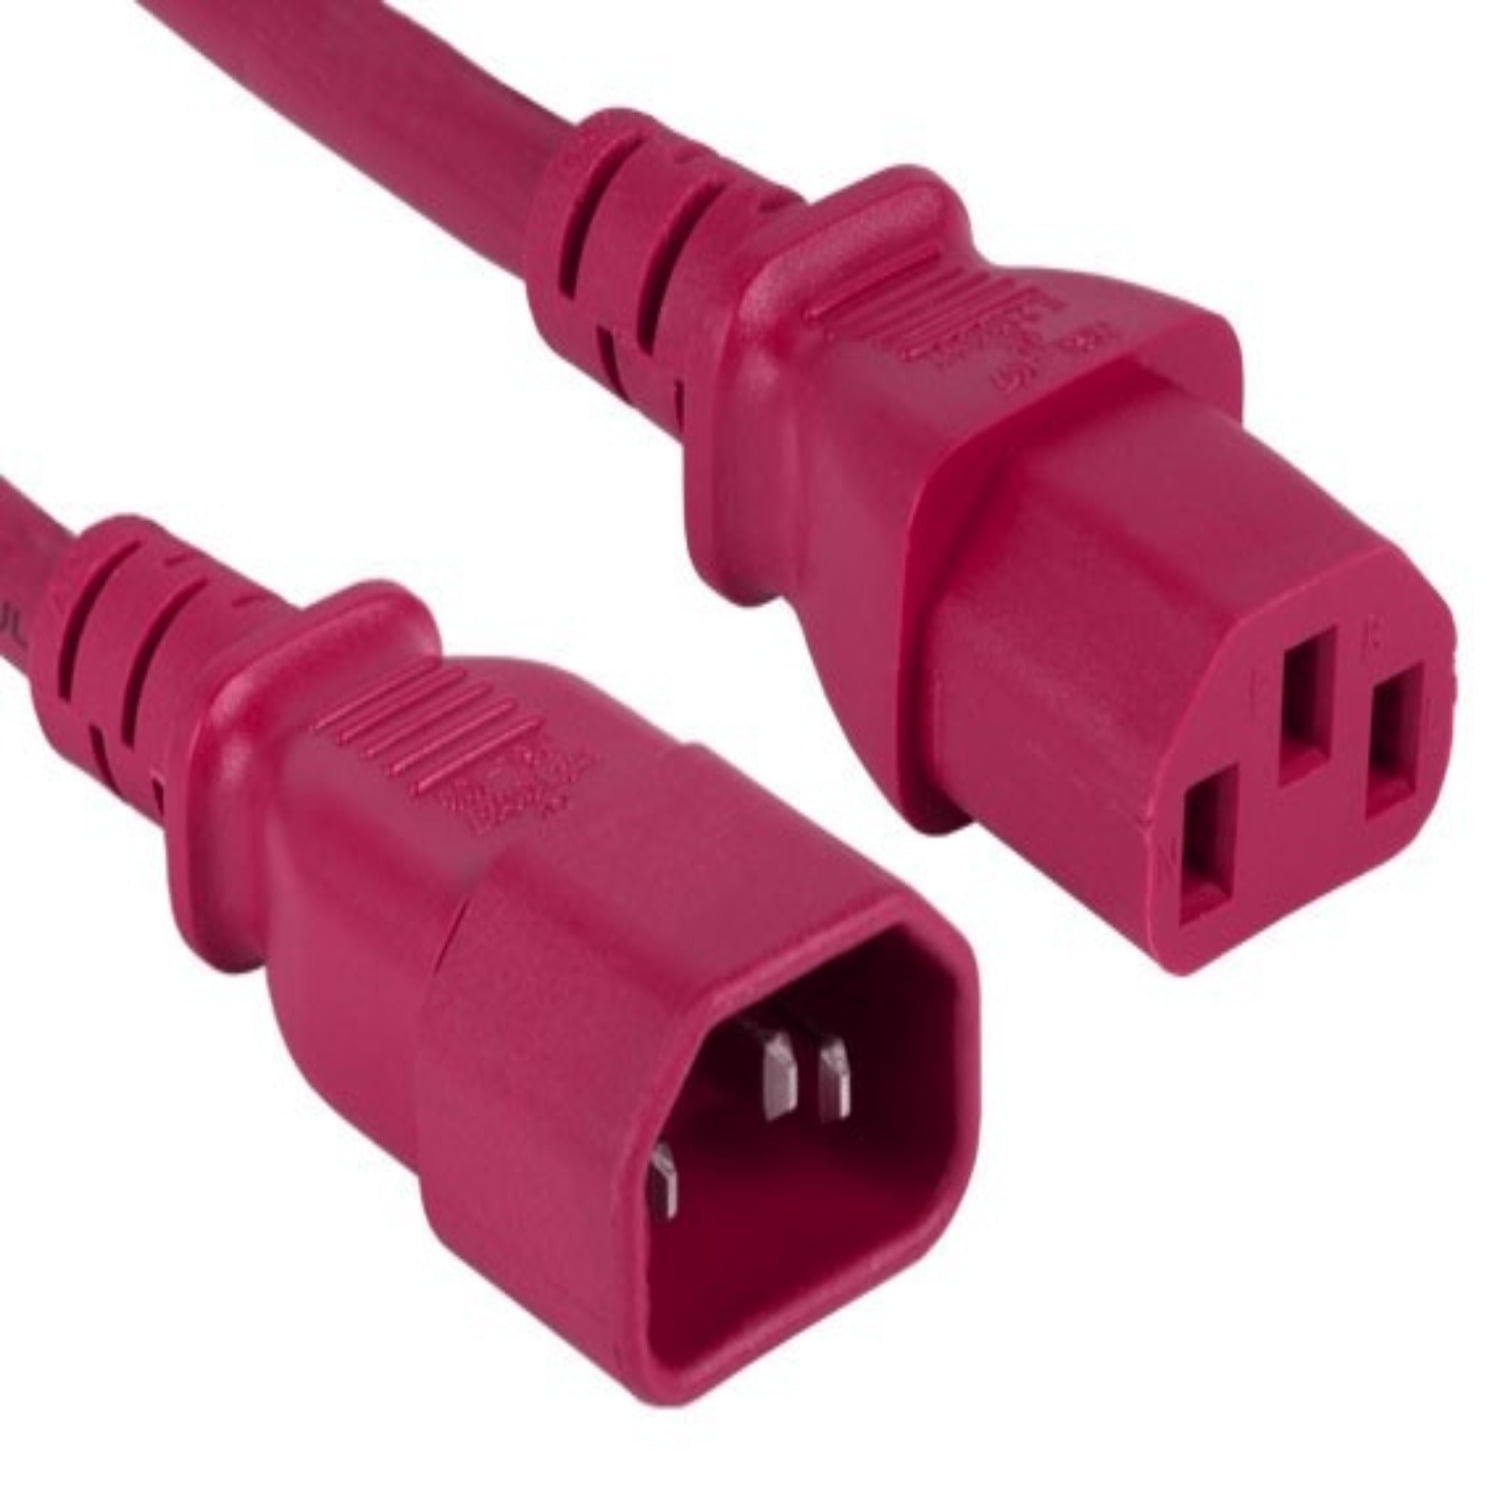 Cable Leader 12 AWG 20A 250V Heavy-Duty Power Cord NEMA L6-20P to IEC 320 C19 UL Listed 1 Pack 8 Foot